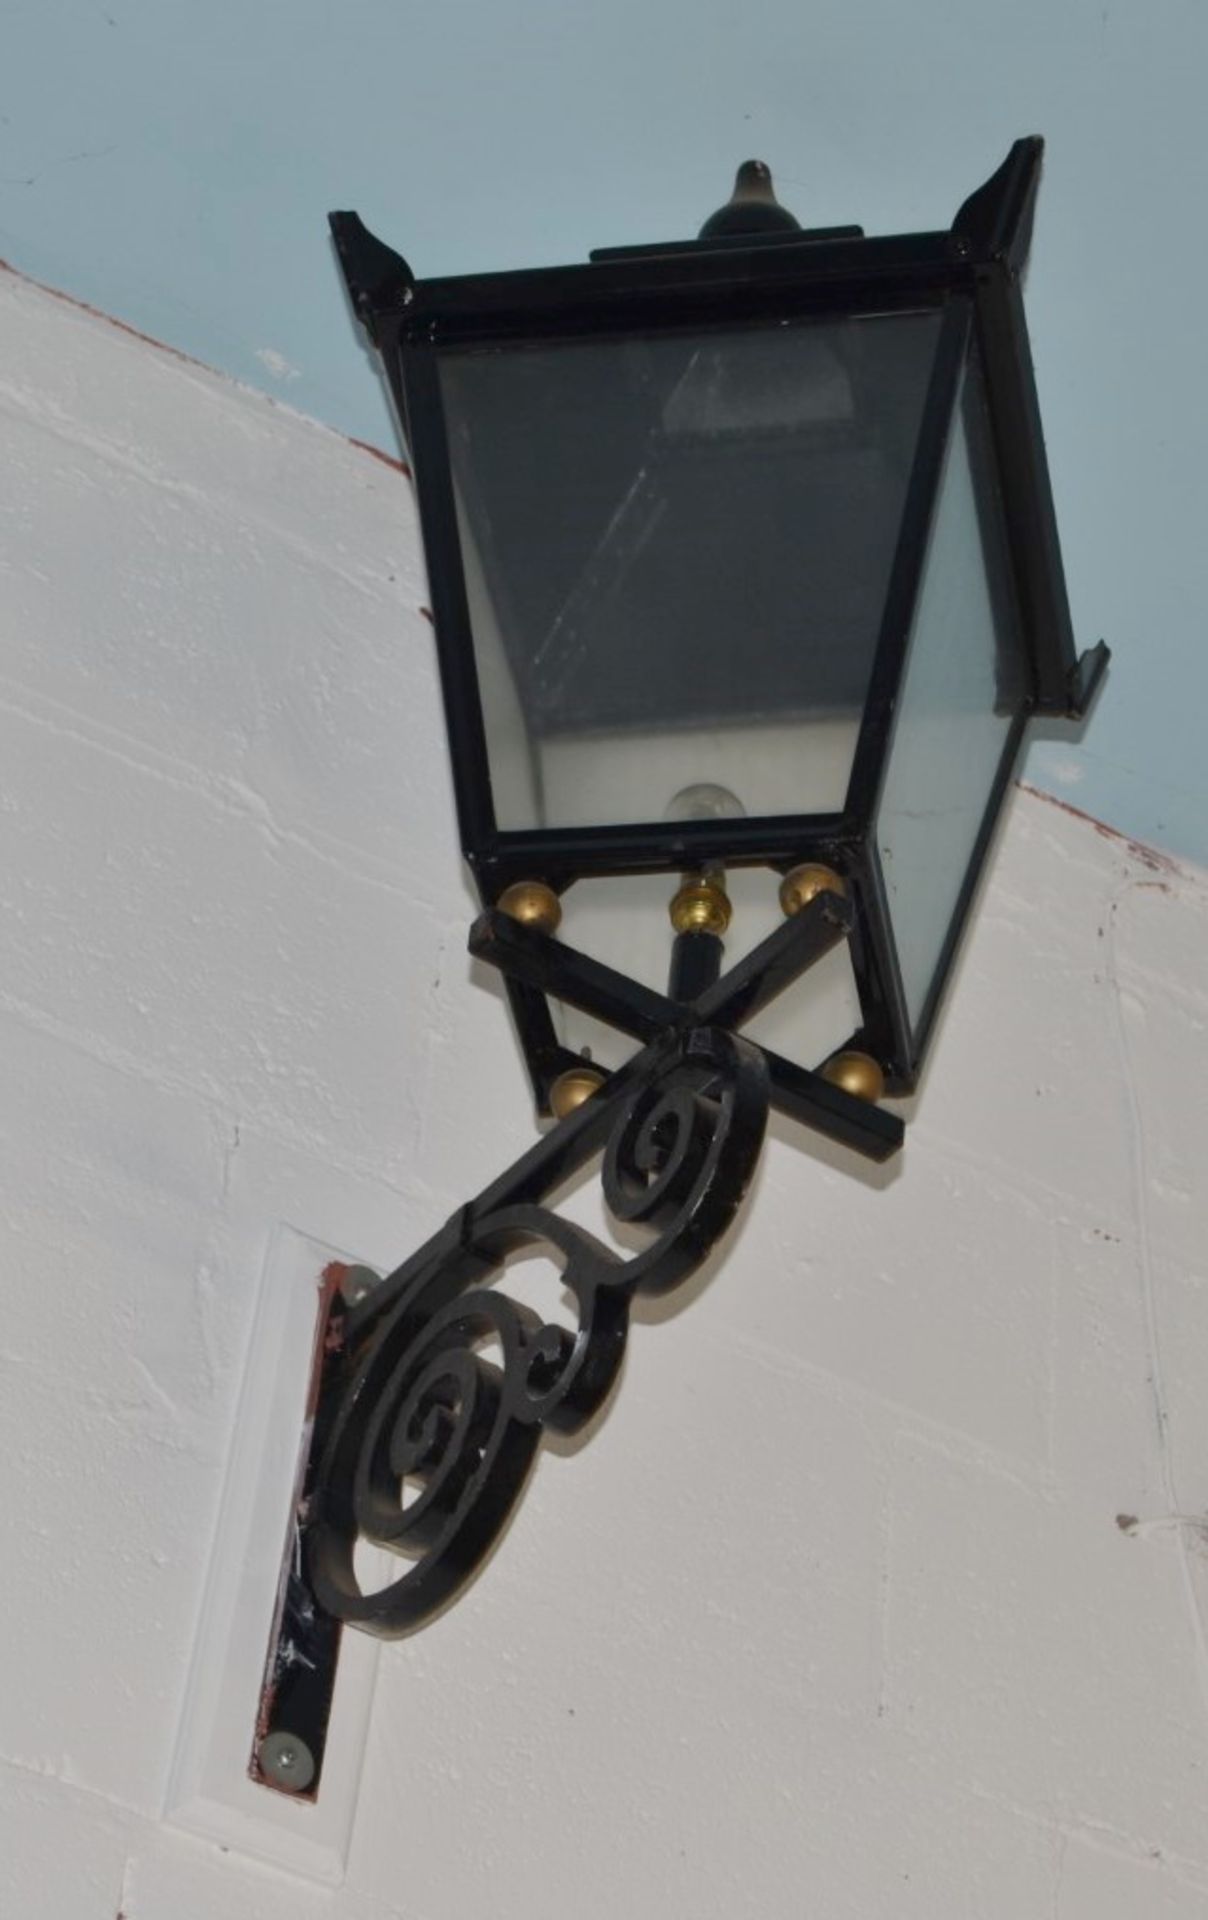 1 x Victorian Style Wall Lantern Light Fitting - Large Size in Black - Overal Height Approx 90 cms - - Image 4 of 4